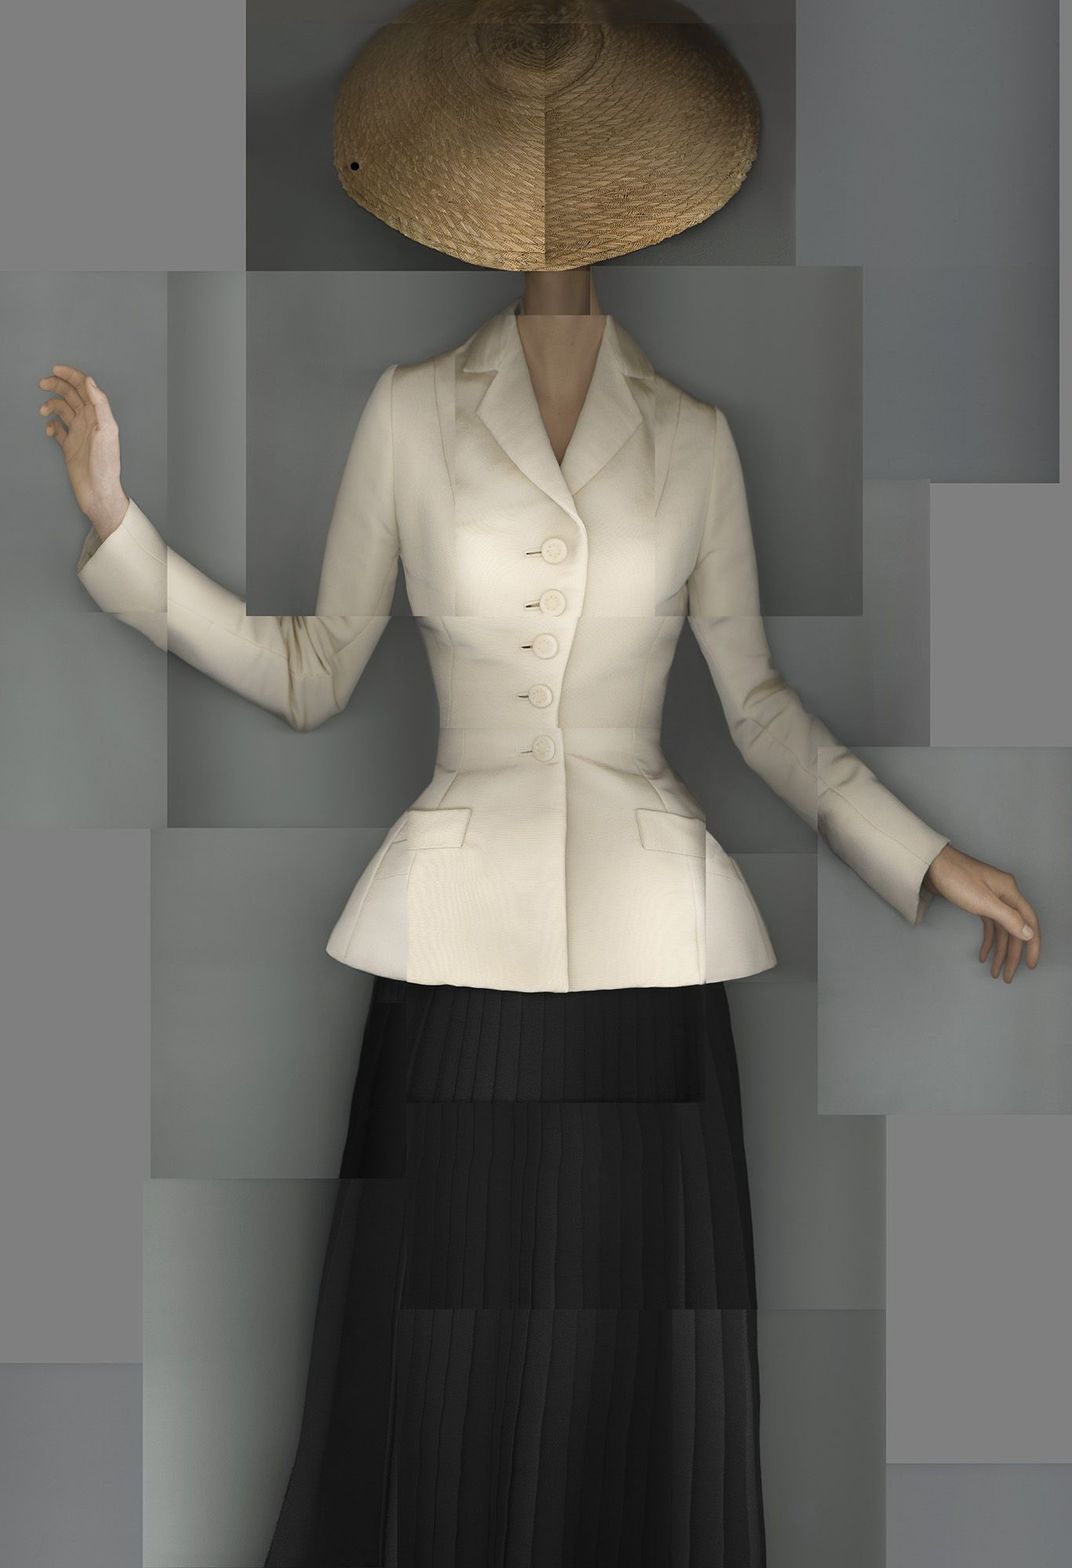 Christian Dior's 1947 bar suit, afternoon ensemble with an ecru natural shantung jacket and black pleated wool crepe skirt